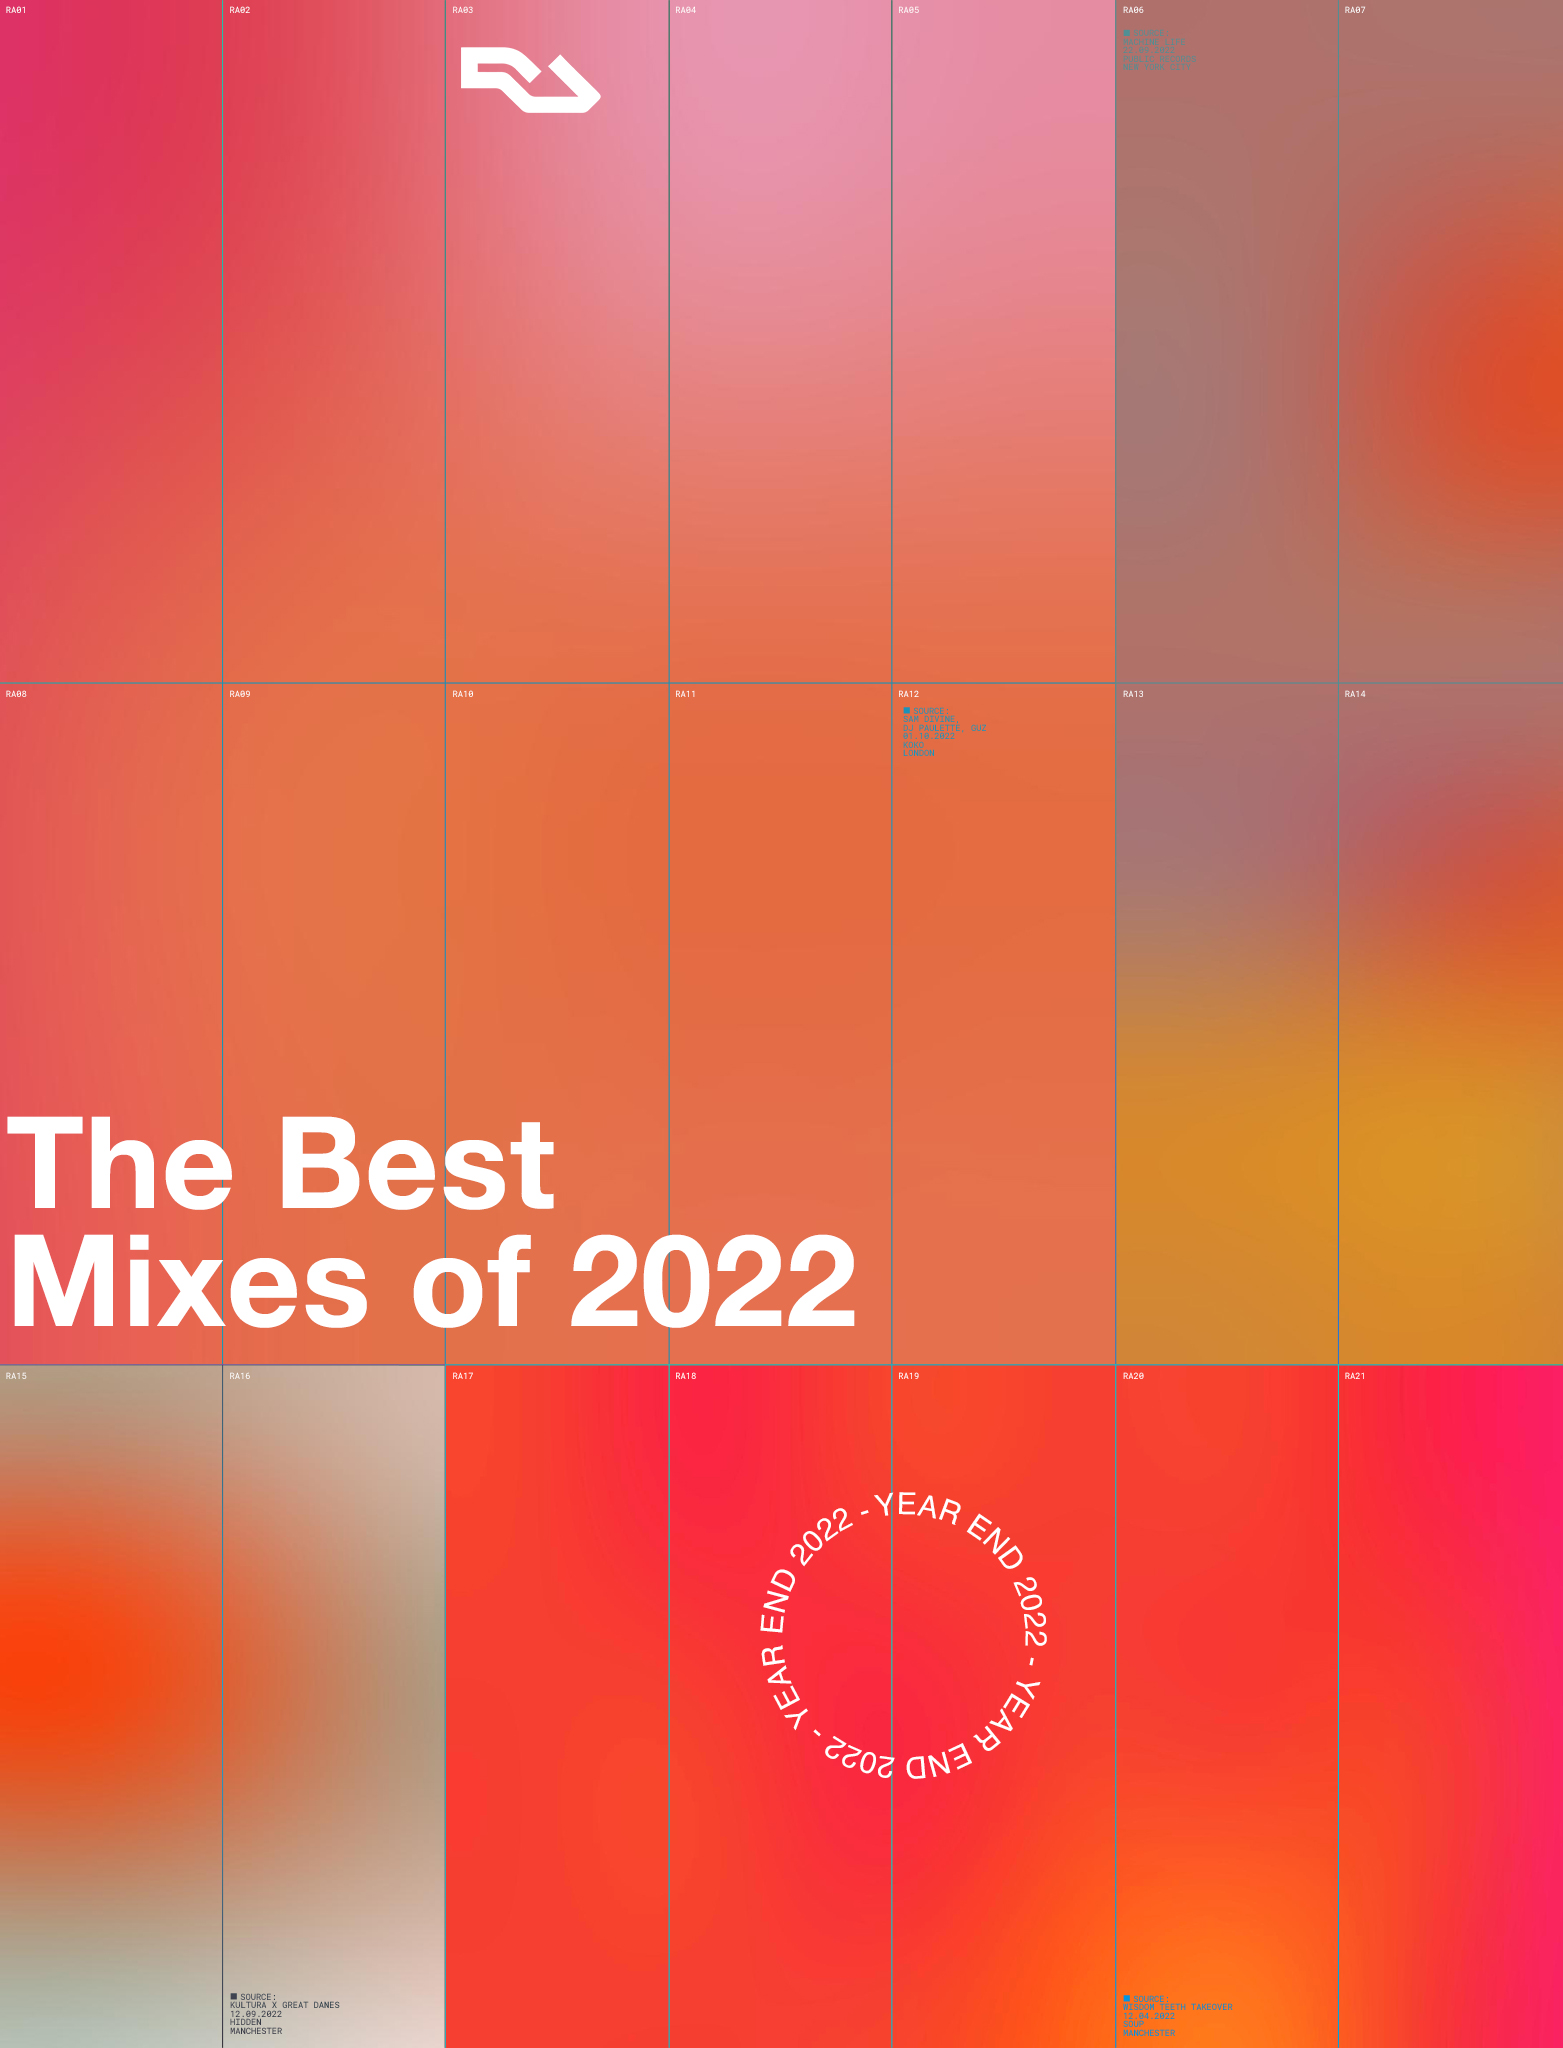 The Best Mixes of 2022